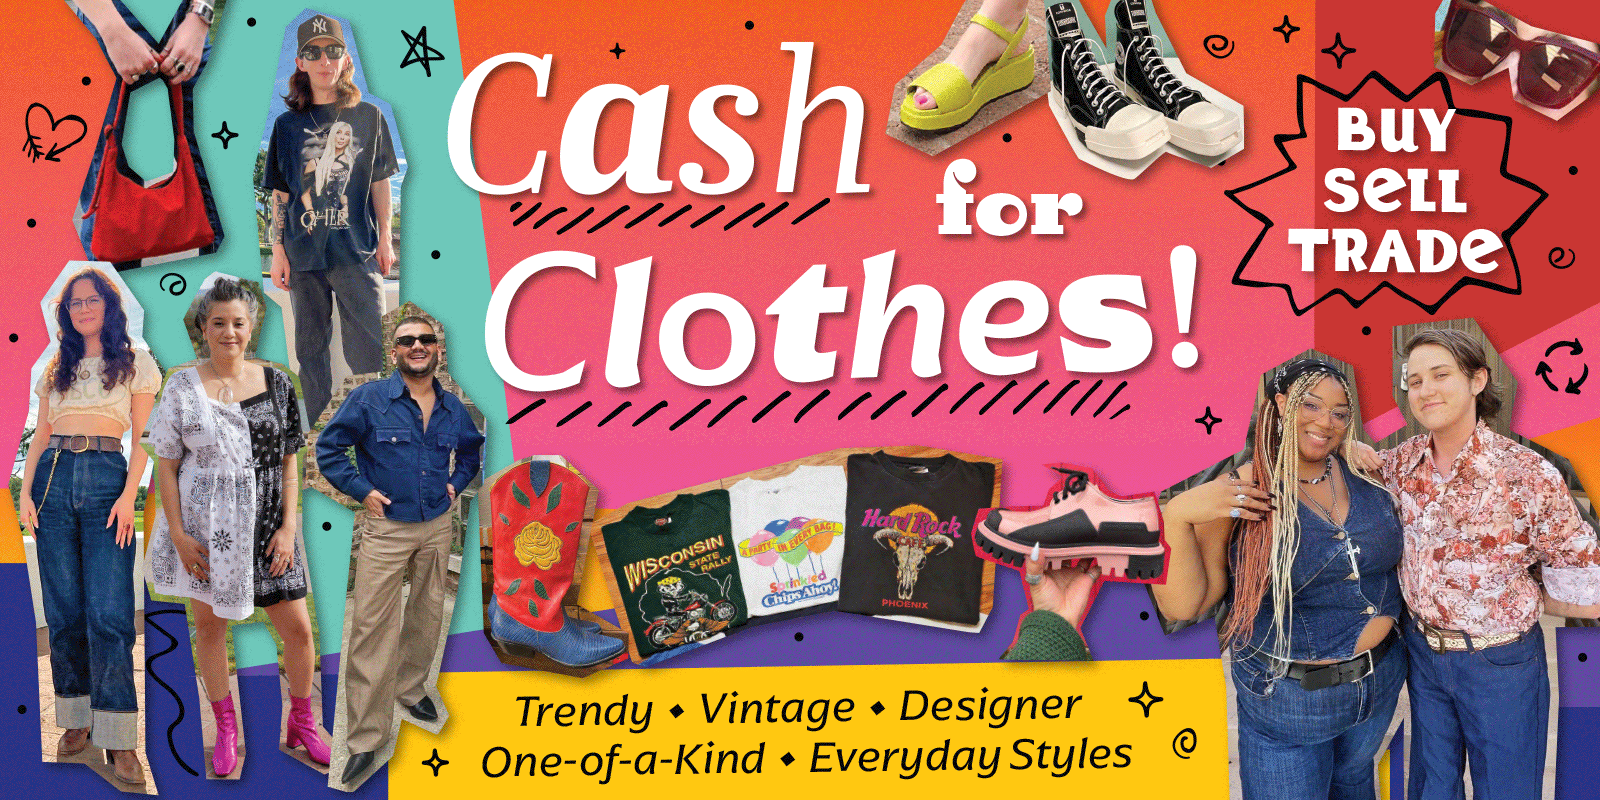 Cash for clothes: sell clothes online